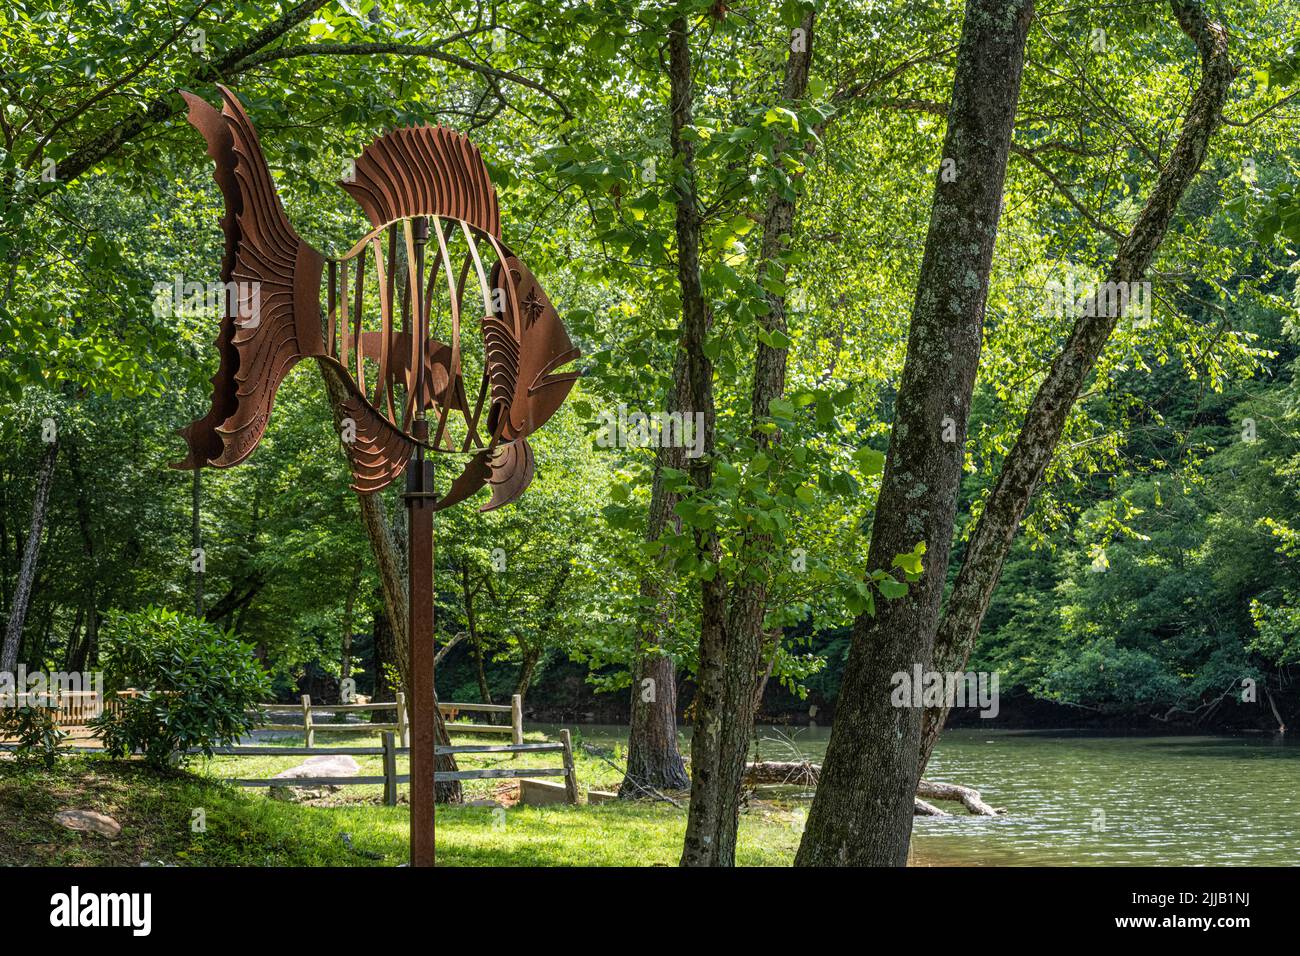 Steel Fish Weathervane sculpture at Meeks Park along the Nottely River in Blairsville, Georgia, by local artist Al Garnto. (USA) Stock Photo